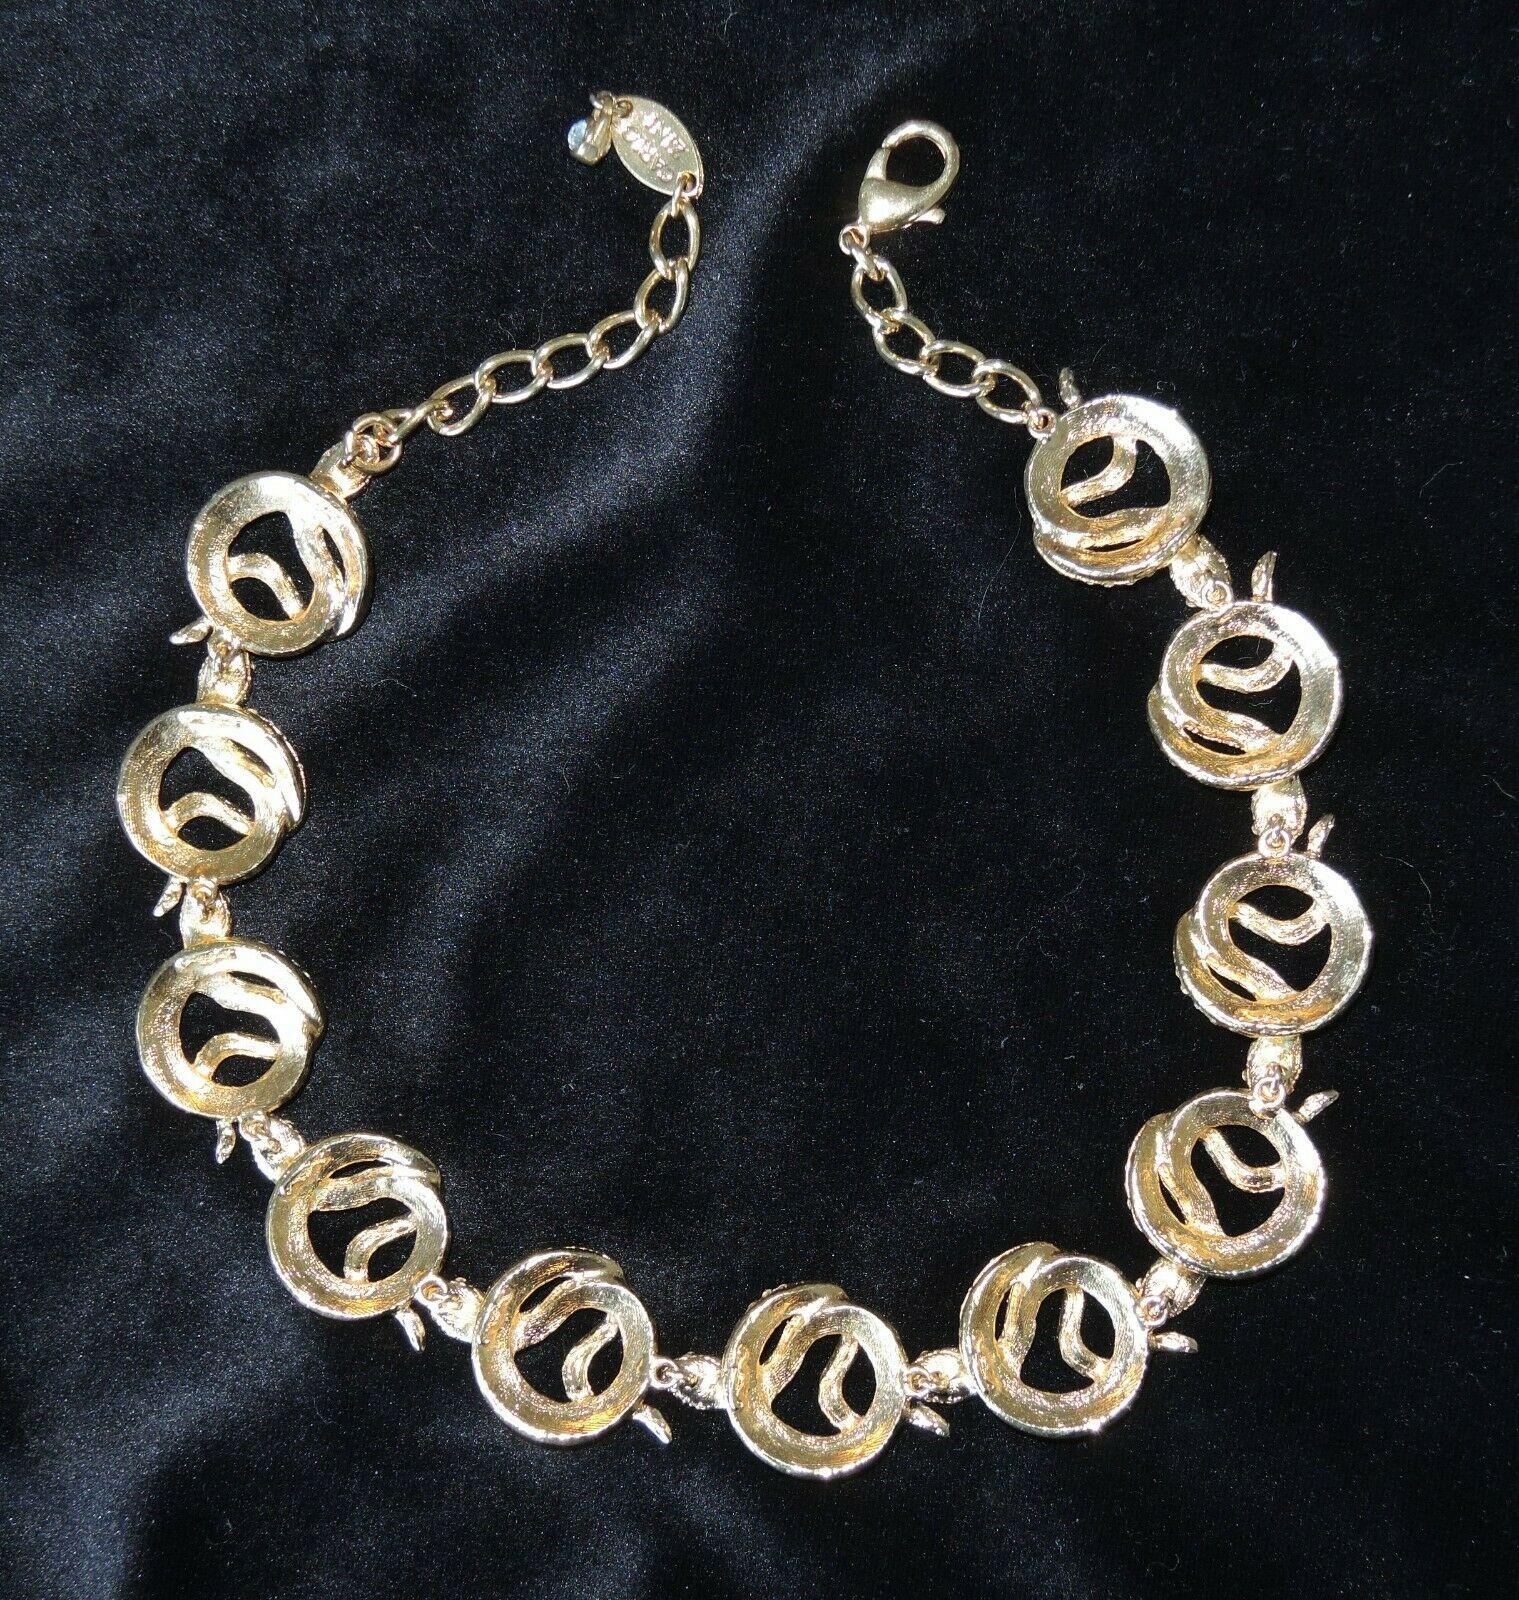 Designer Signed Carlo Zini Sparkling Crystal Serpent Snake Link Necklace In New Condition For Sale In Montreal, QC